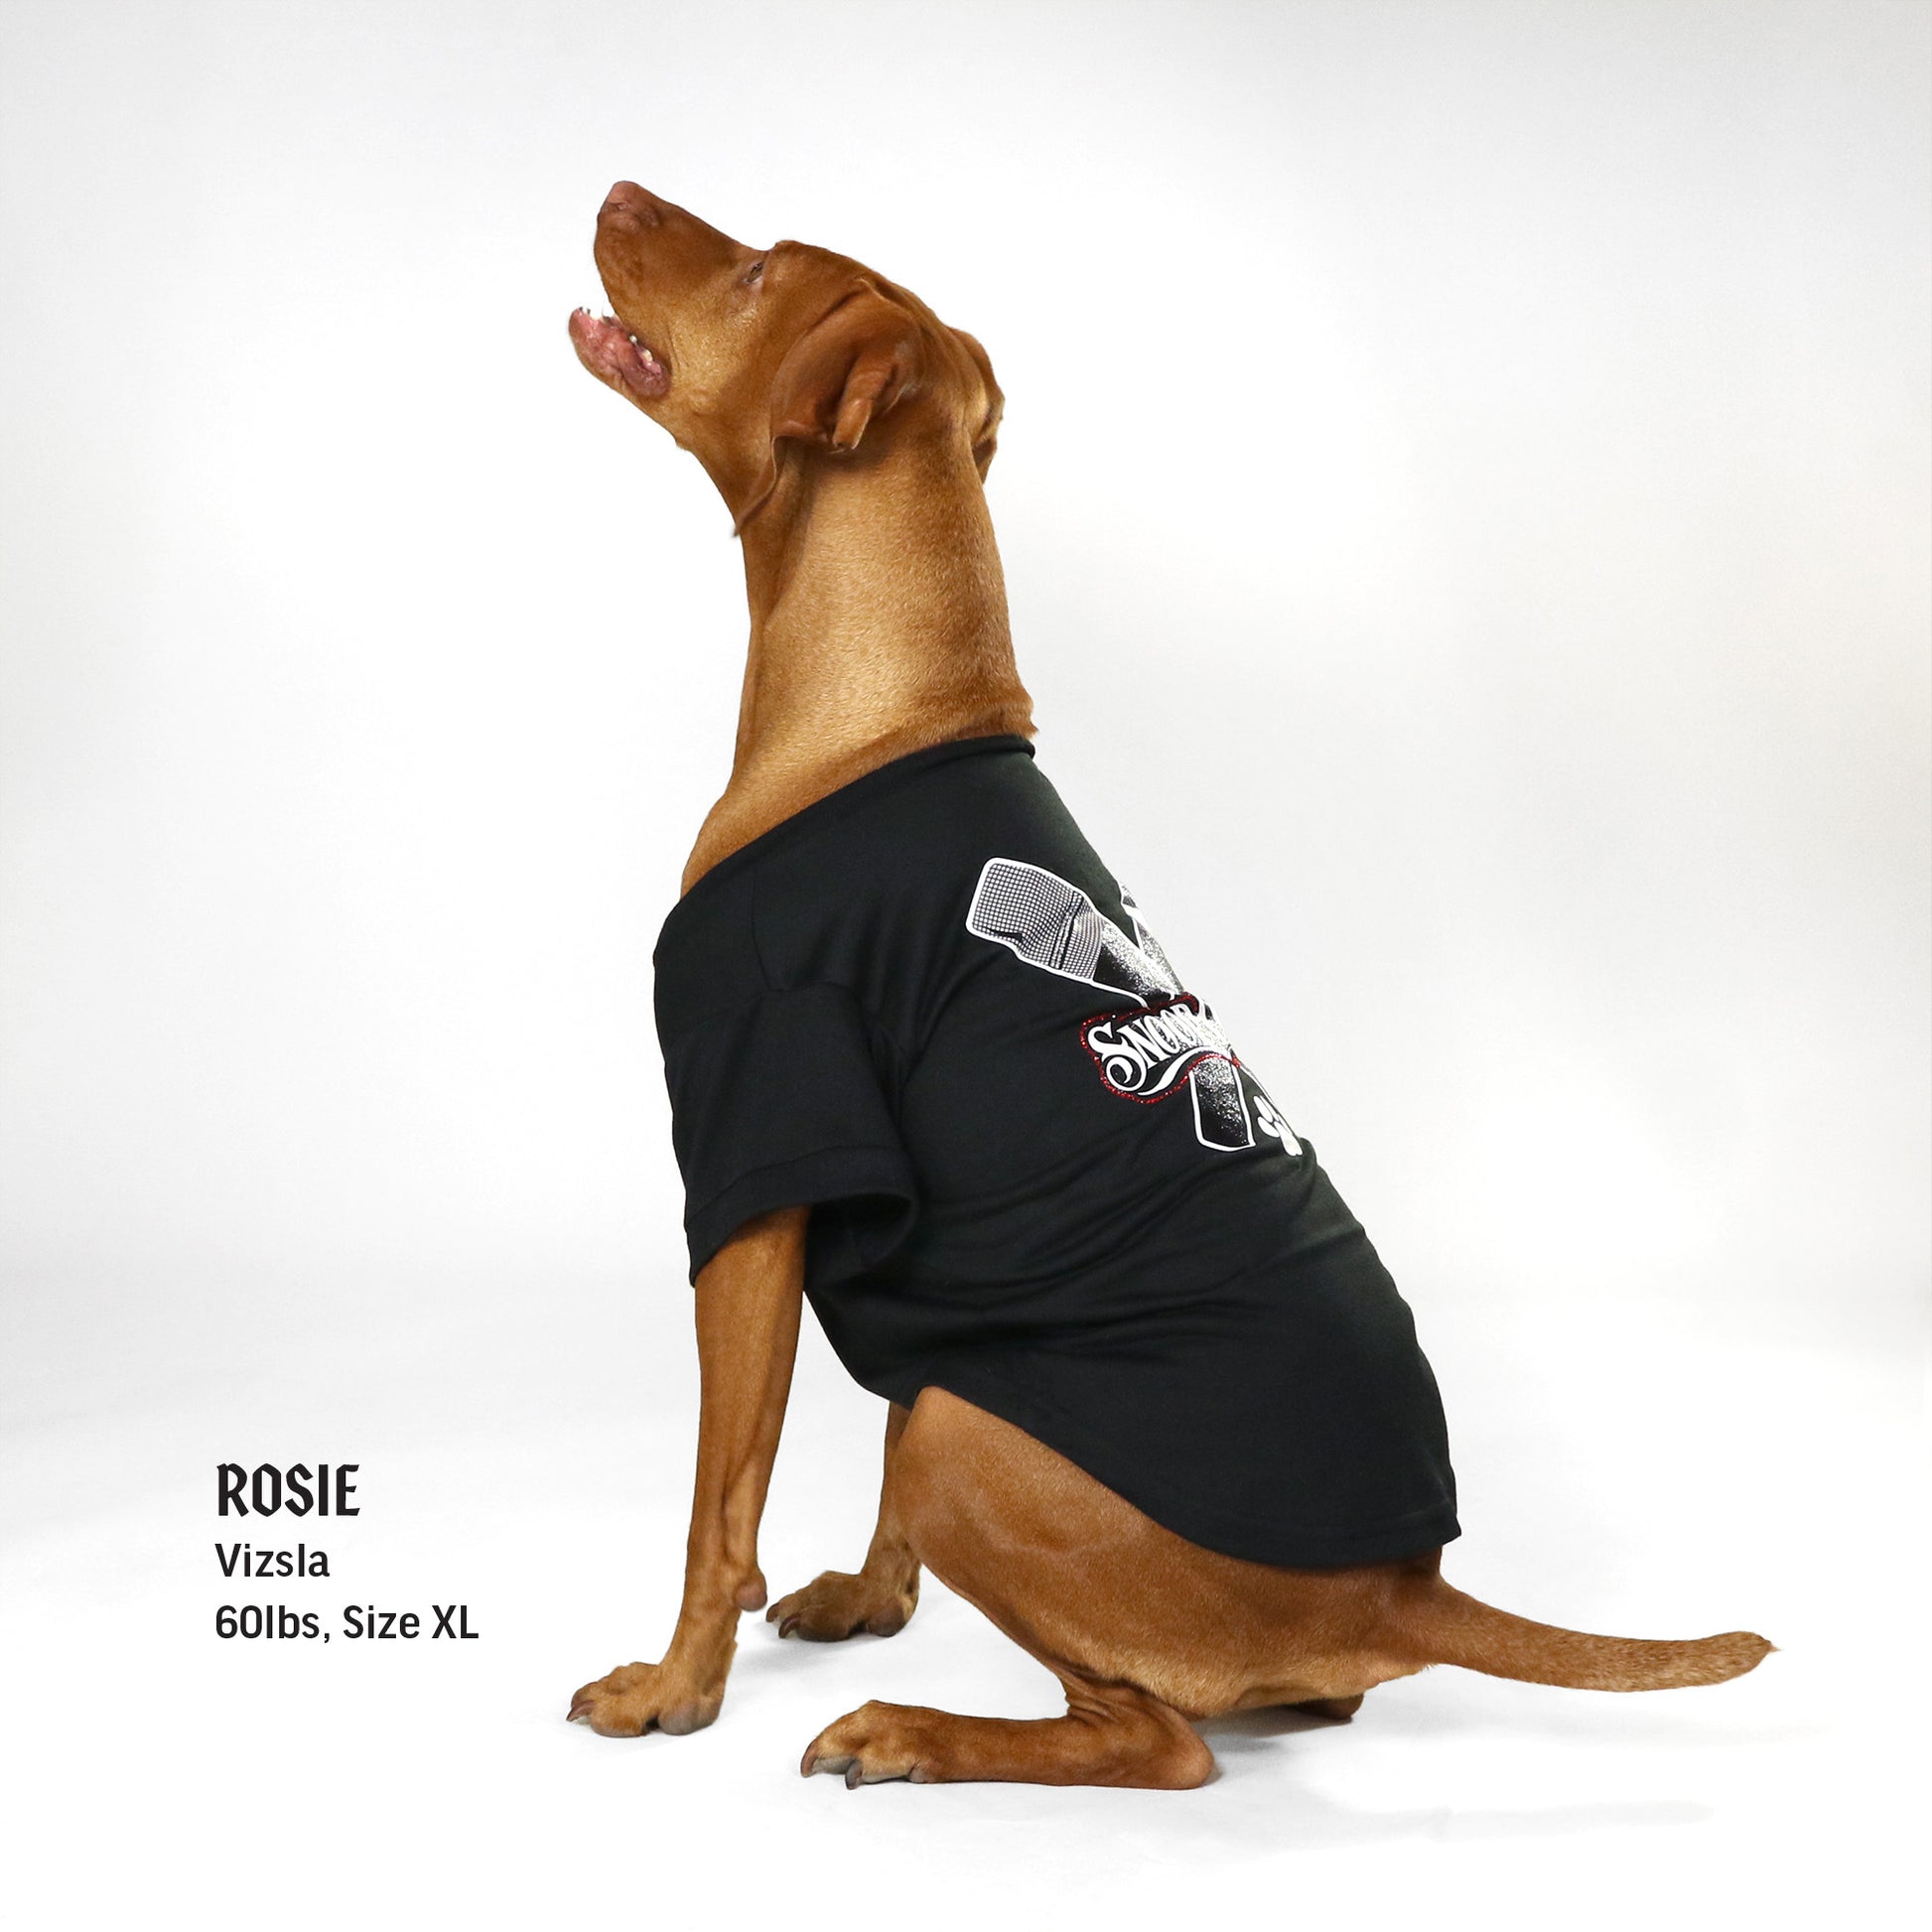 Rosie the Vizsla wearing the Mic Drop Deluxe Pet T-shirt in size X-Large.